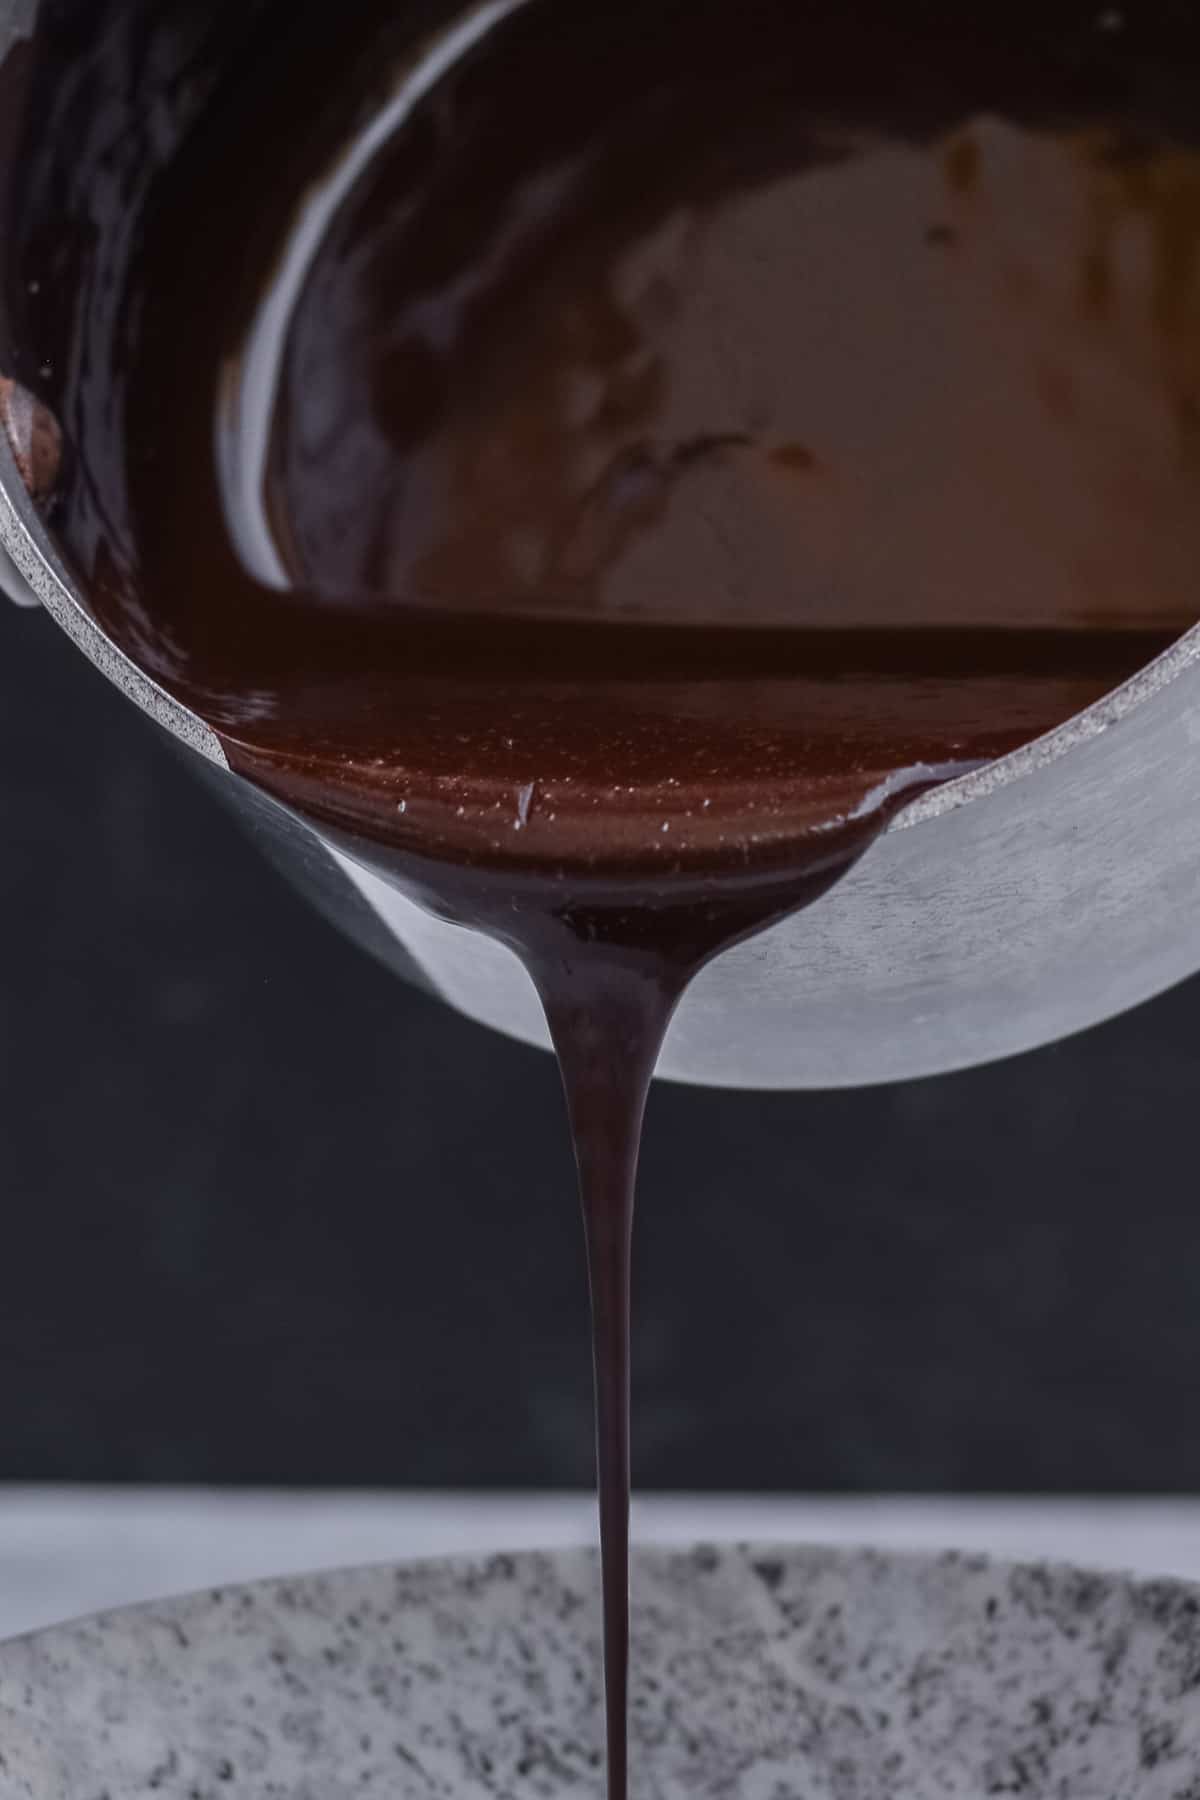 Saucepan pouring chocolate sauce out into a bowl.